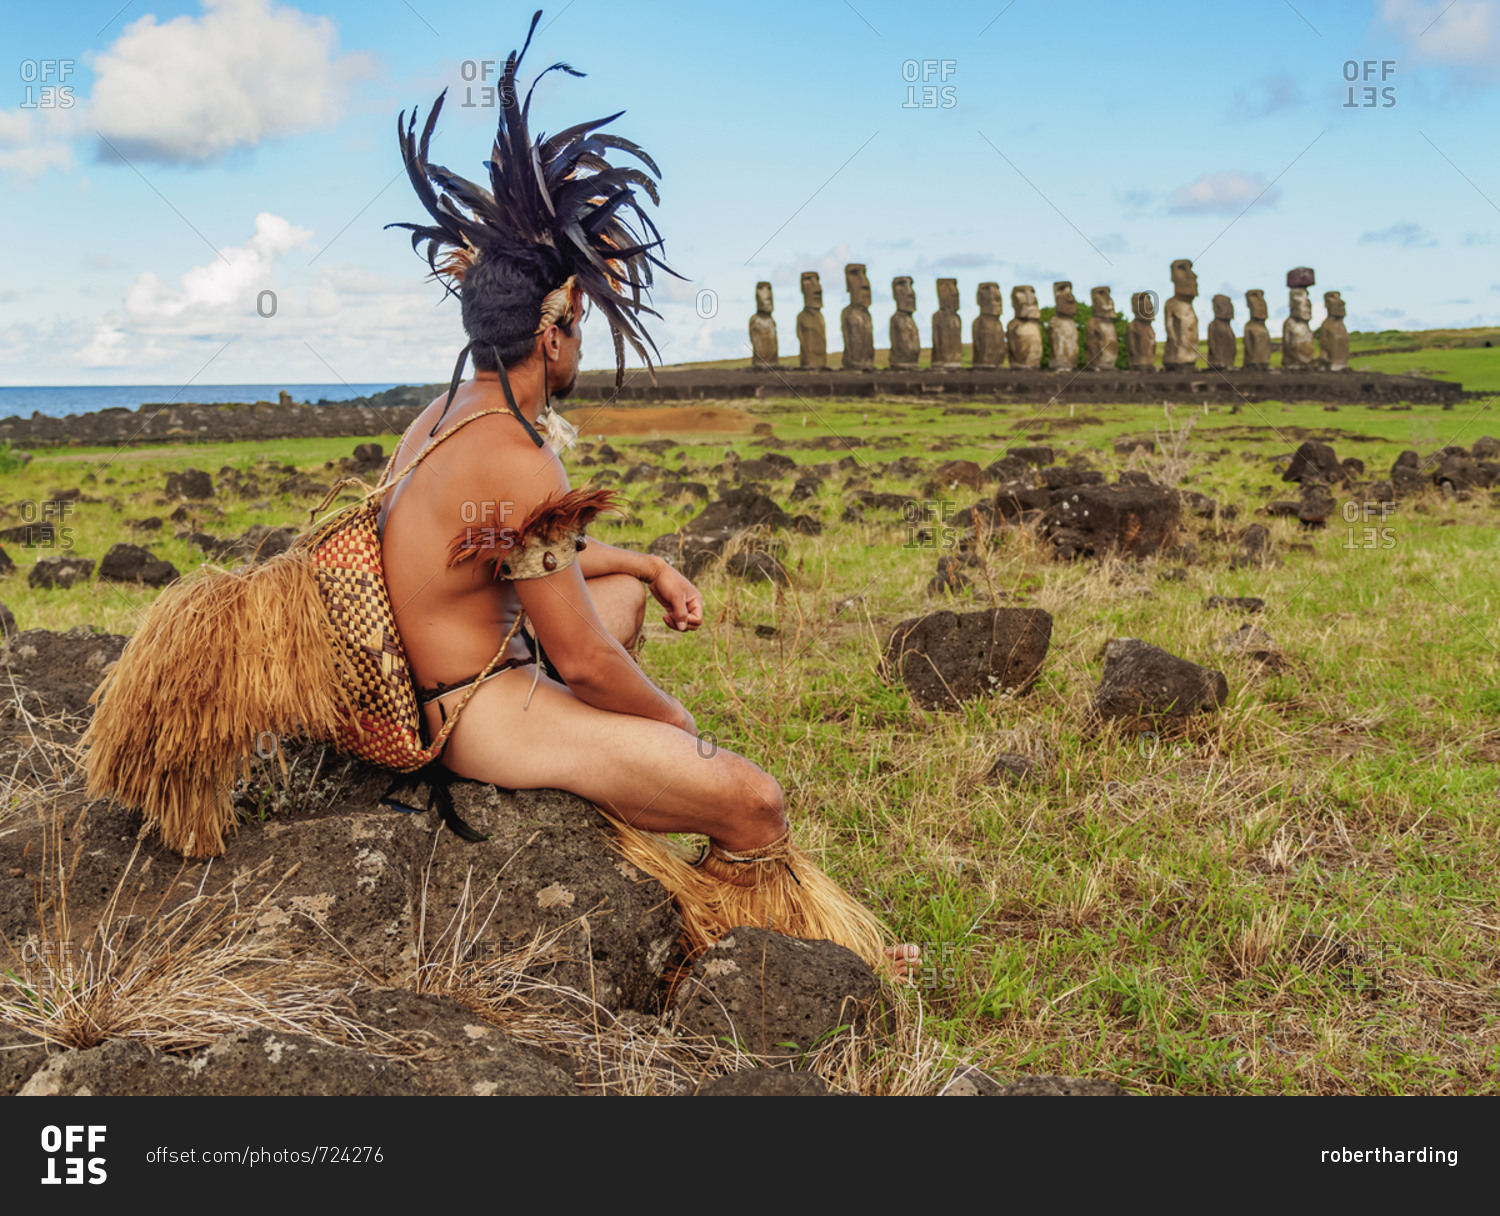 Native Rapa Nui man in traditional costume and Moais in Ahu Tongariki, Rapa Nui National Park, UNESCO World Heritage Site, Easter Island, Chile, South America